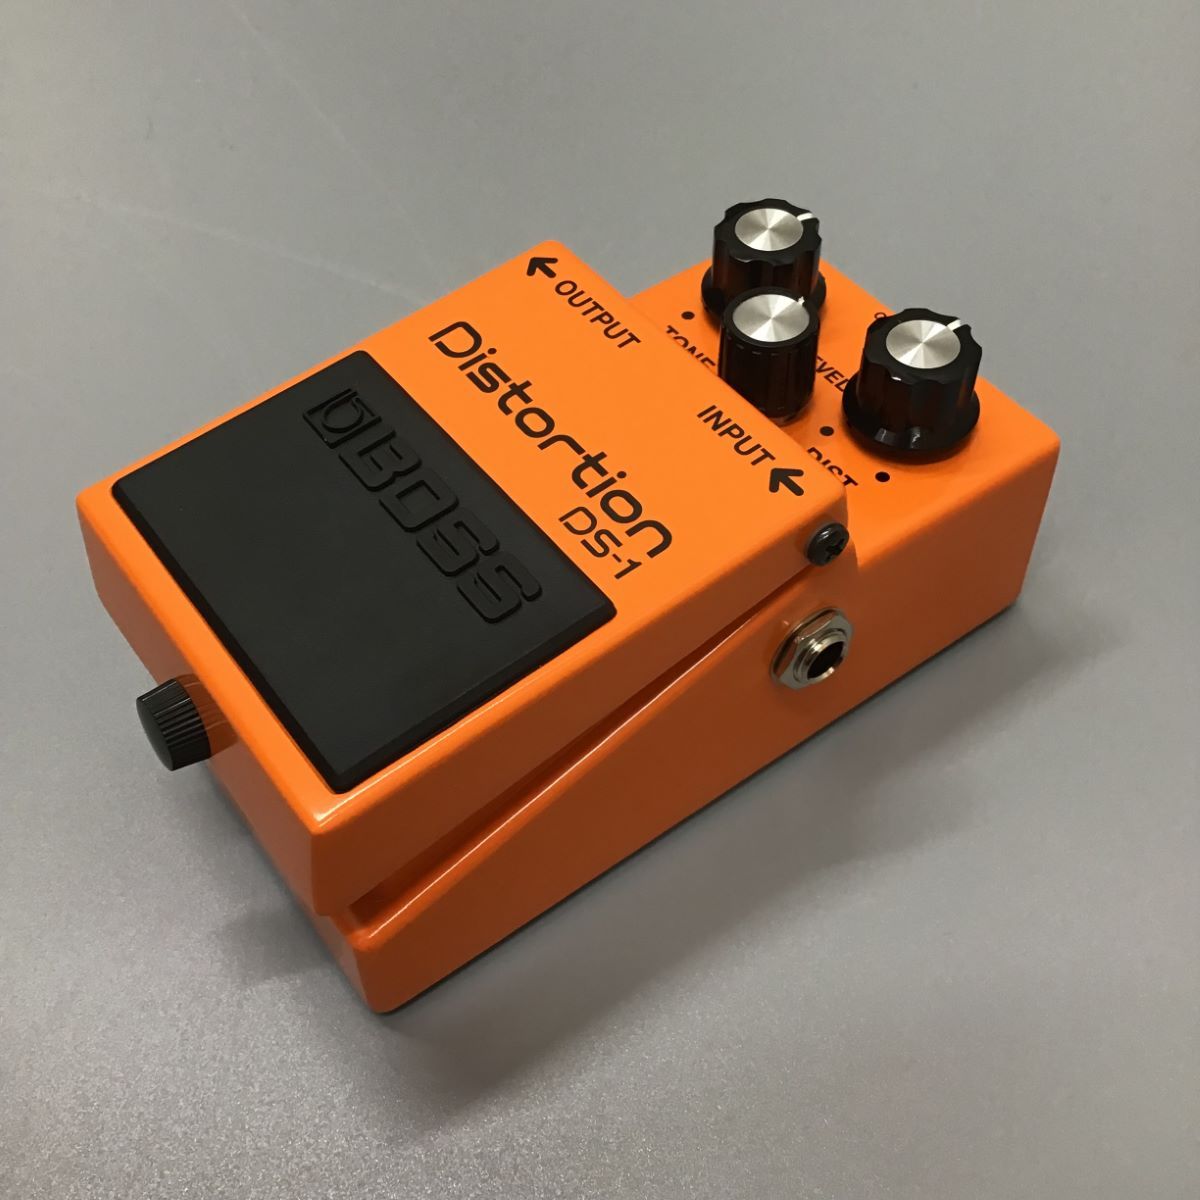 DS-1 (Distortion) 銀ネジ-